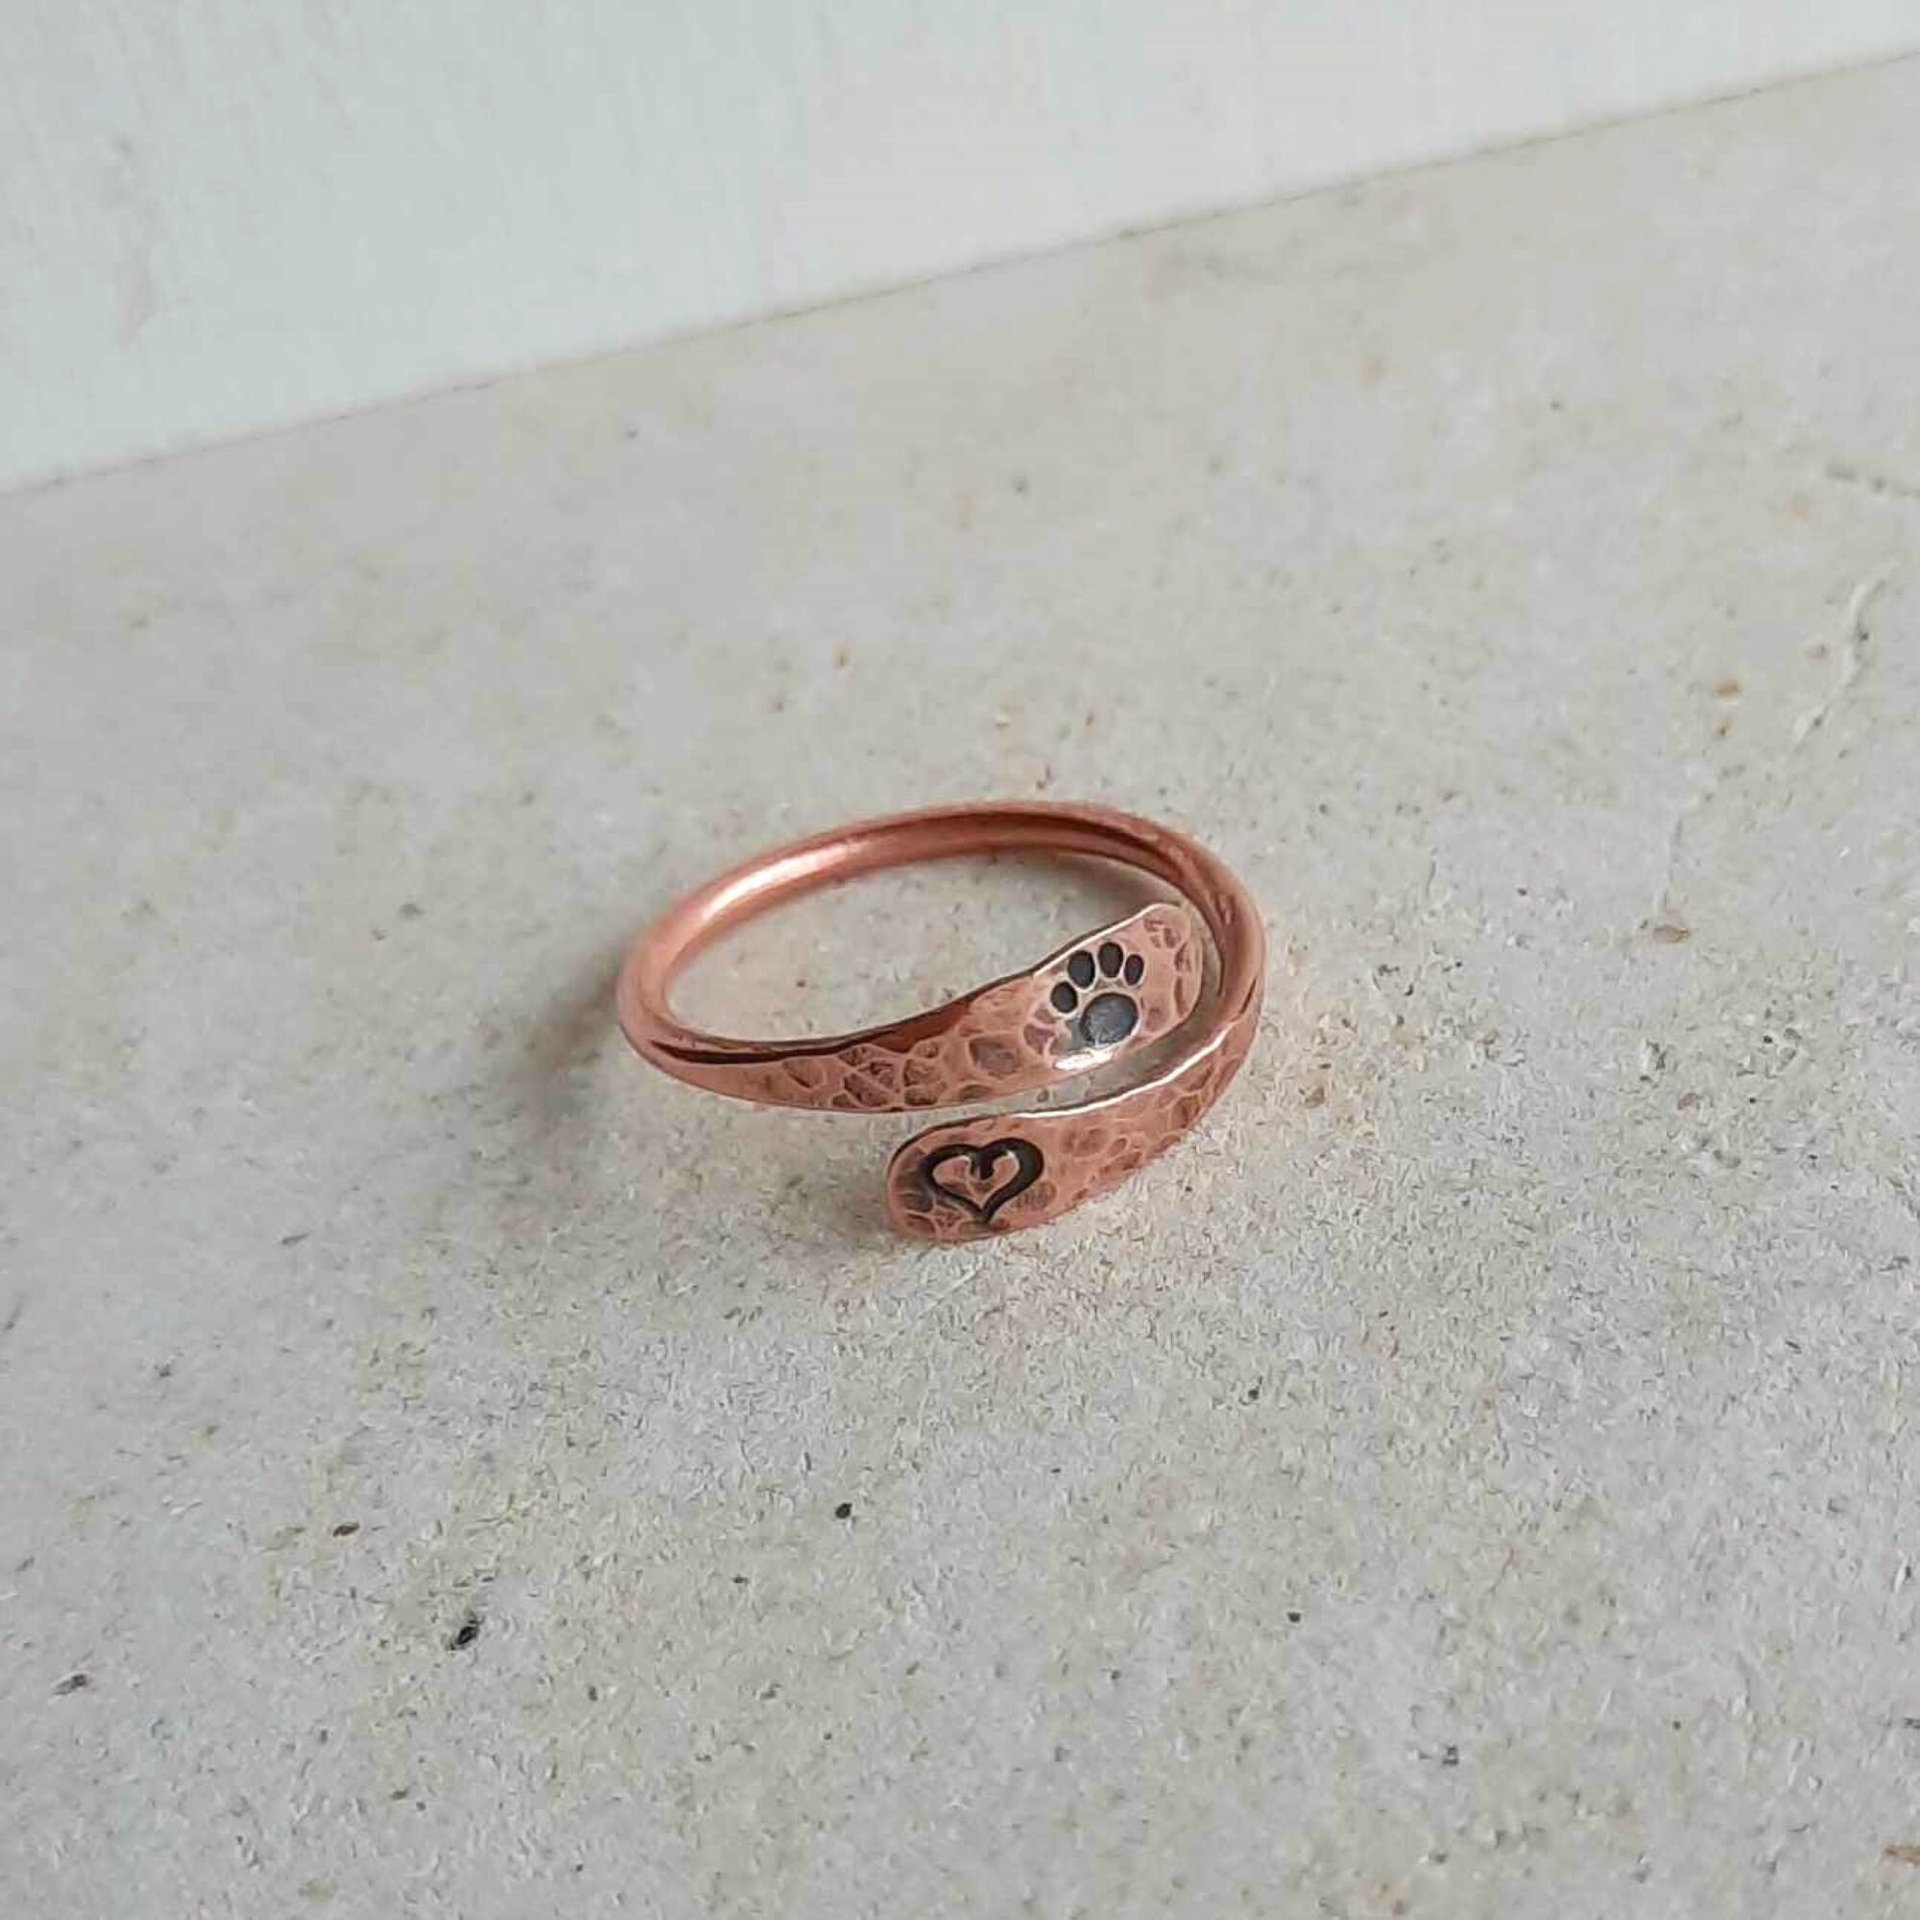 Oxidised copper paw print and love heart adjustable Viking style wrap around ring, handmade by The Tiny Tree Frog Jewellery